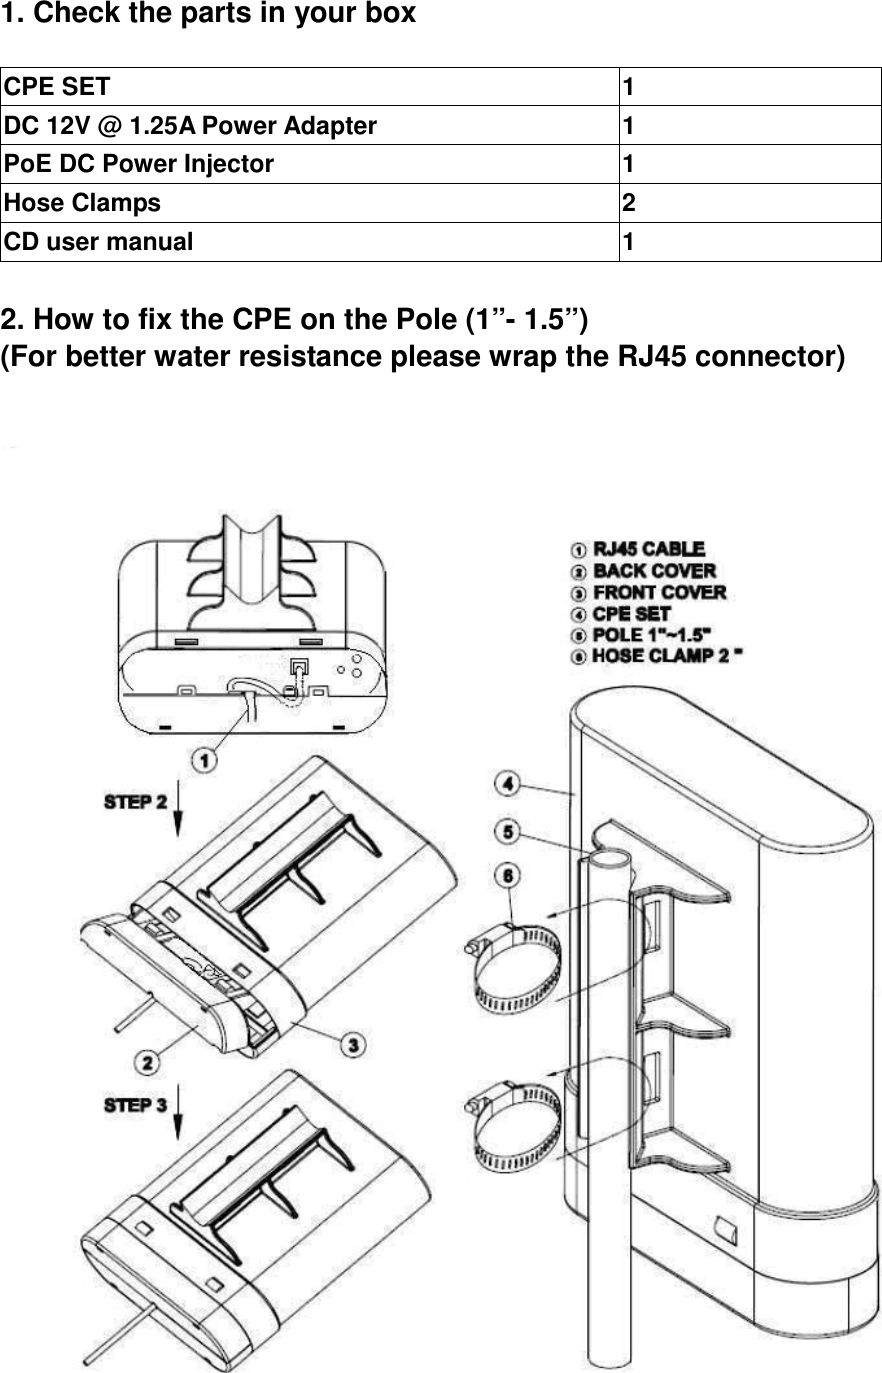 1. Check the parts in your box  CPE SET                                                              1 DC 12V @ 1.25A Power Adapter  1 PoE DC Power Injector  1 Hose Clamps                                    2 CD user manual  1  2. How to fix the CPE on the Pole (1”- 1.5”) (For better water resistance please wrap the RJ45 connector)   